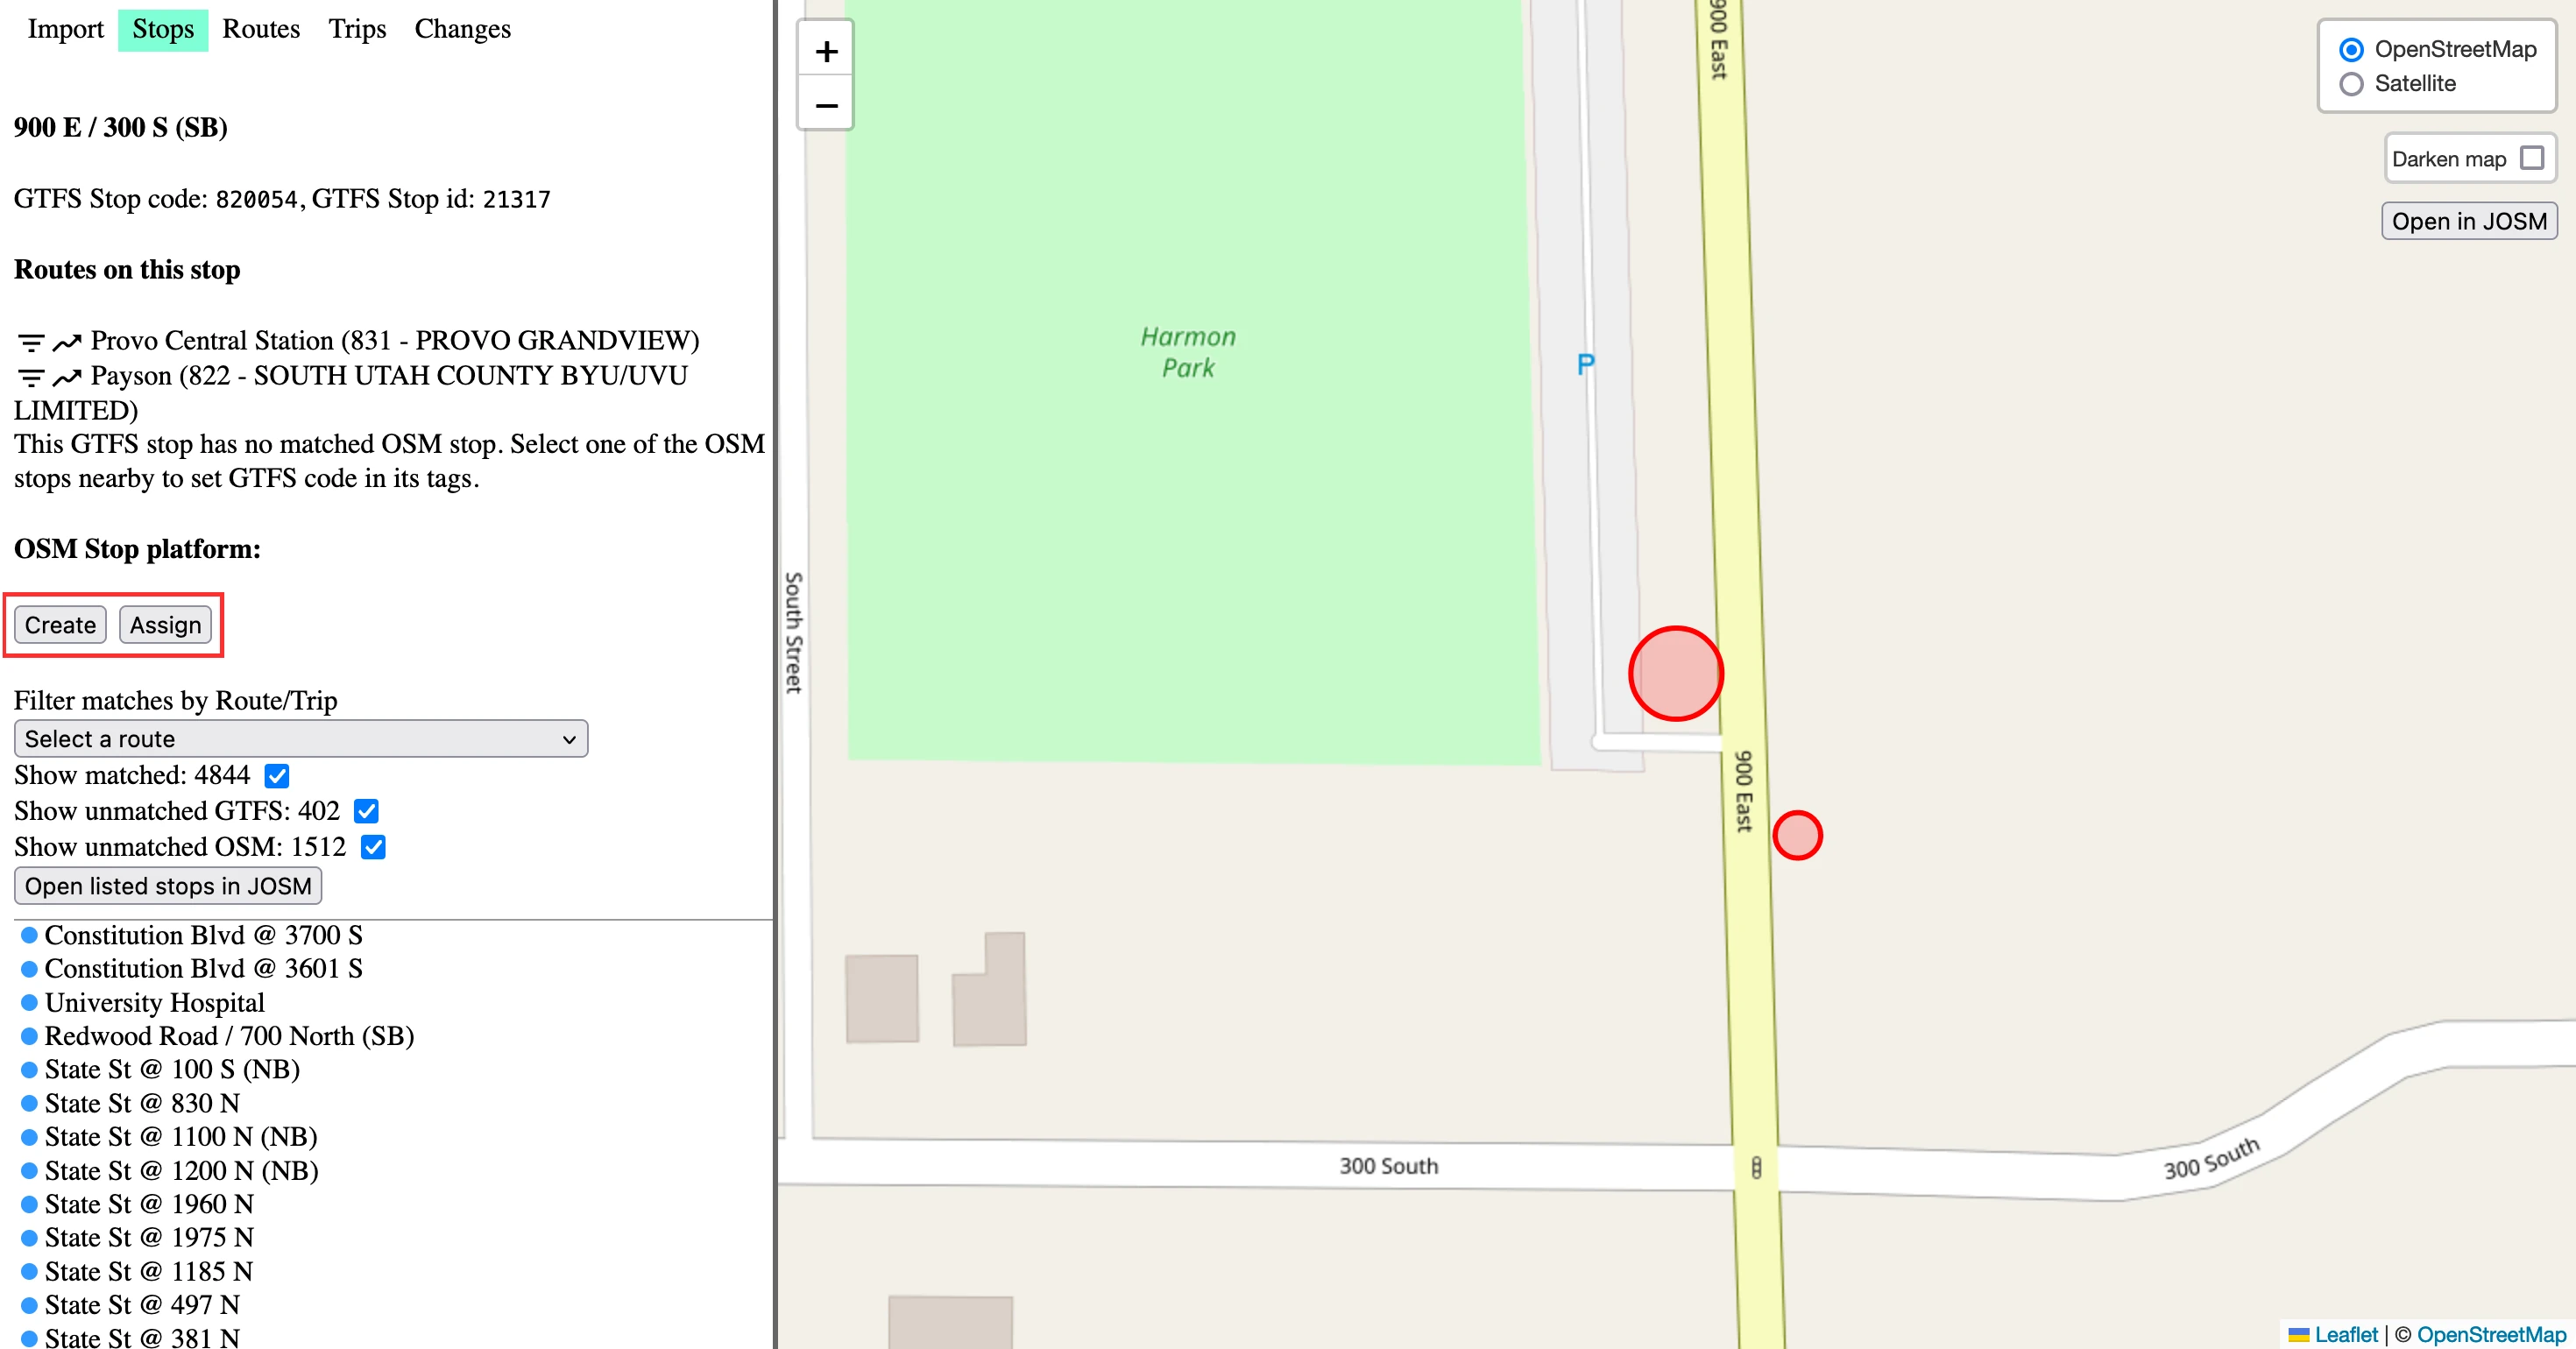 The OSM editing app. The “Stops” tab is selected. In the map, there are red circles on either side of a road. One is larger than the other, indicating its selection. Text in the bar on the left reads: “900 E / 300 S (SB)”, then “GTFS Stop code: 820054, GTFS Stop id: 21317”. Then, “Routes on this stop: Provo Central Station (831 - PROVO GRANDVIEW)” with a filter icon and a rising arrow icon. There is another similar stop. Then “This GTFS stop has no matched OSM stop. Select one of the OSM stops nearby to set GTFS code in its tags”. Then, “OSM Stop platform:” and two buttons reading “Create” and “Assign”. These buttons are highlighted. Then there are stop filter options.